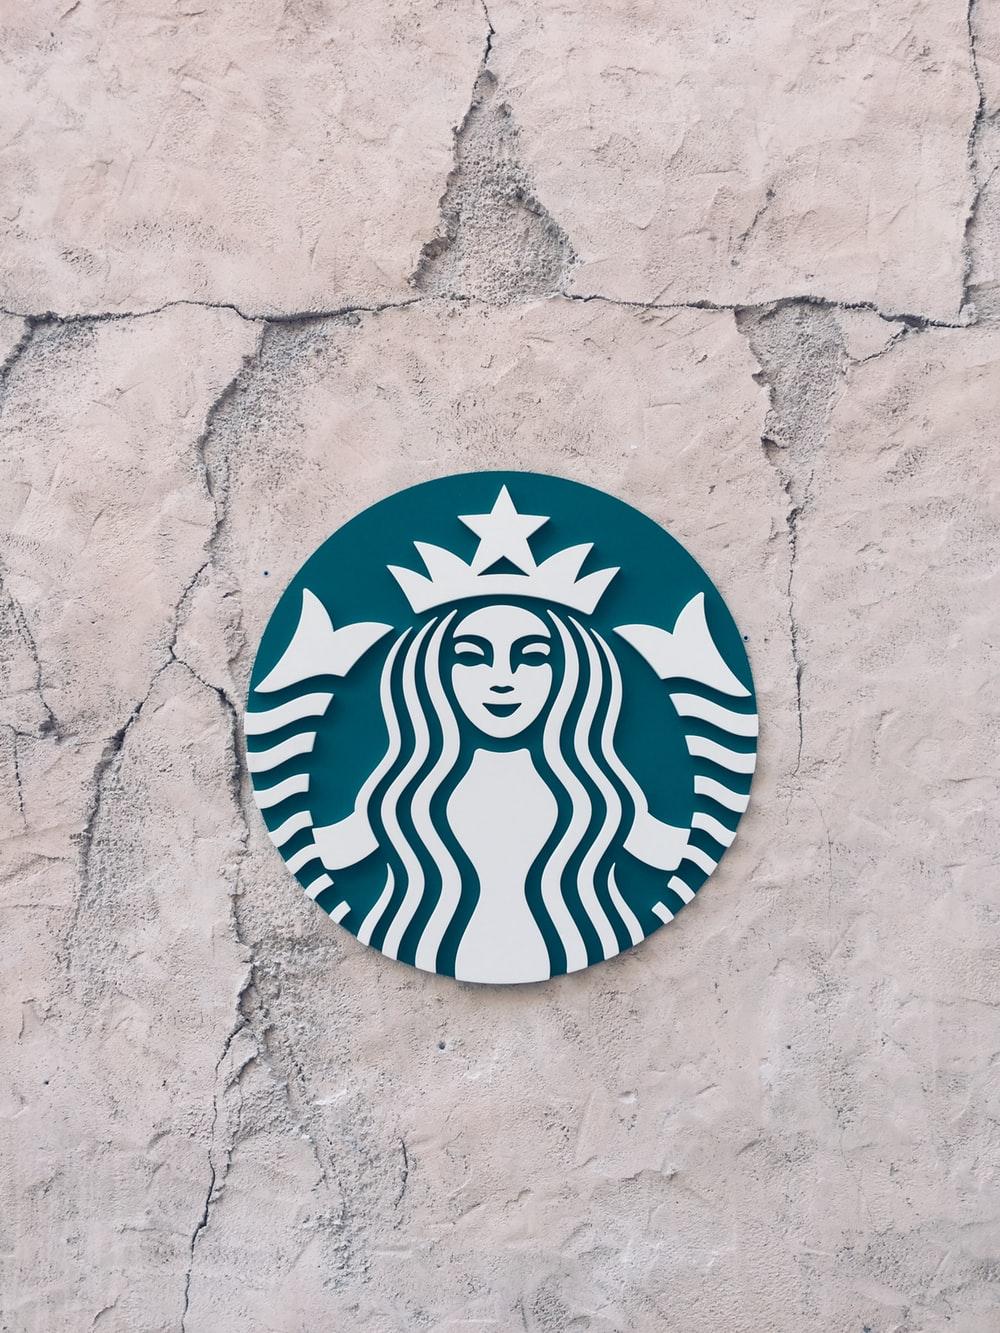 Starbucks Coffee Picture [HQ]. Download Free Image